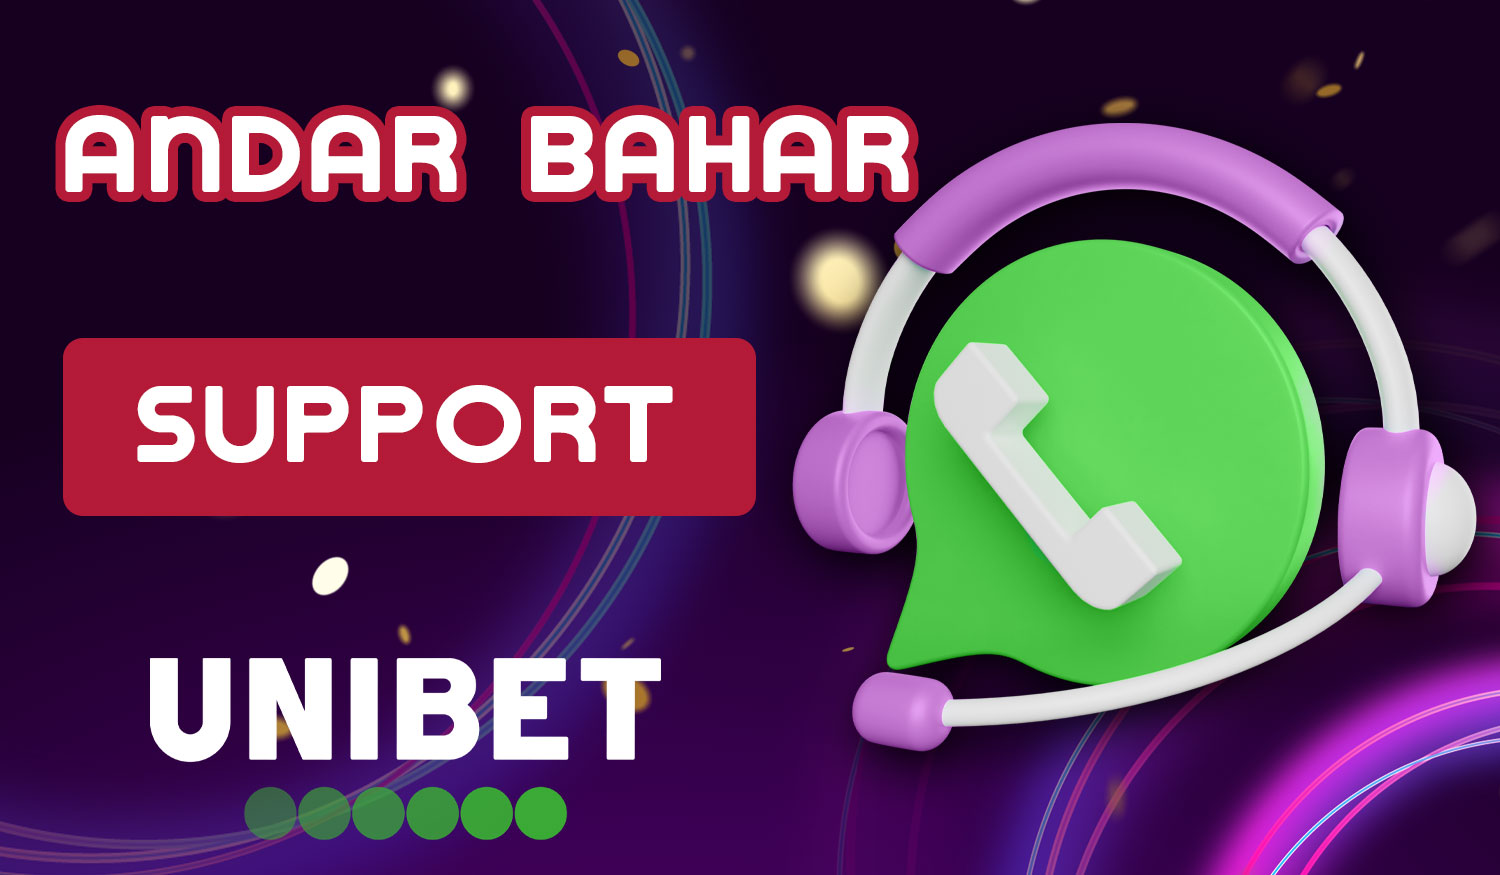 If you have any questions or difficulties while playing Andar Bahar on the casino website, you can use the Unibet India support service, which operates 24/7